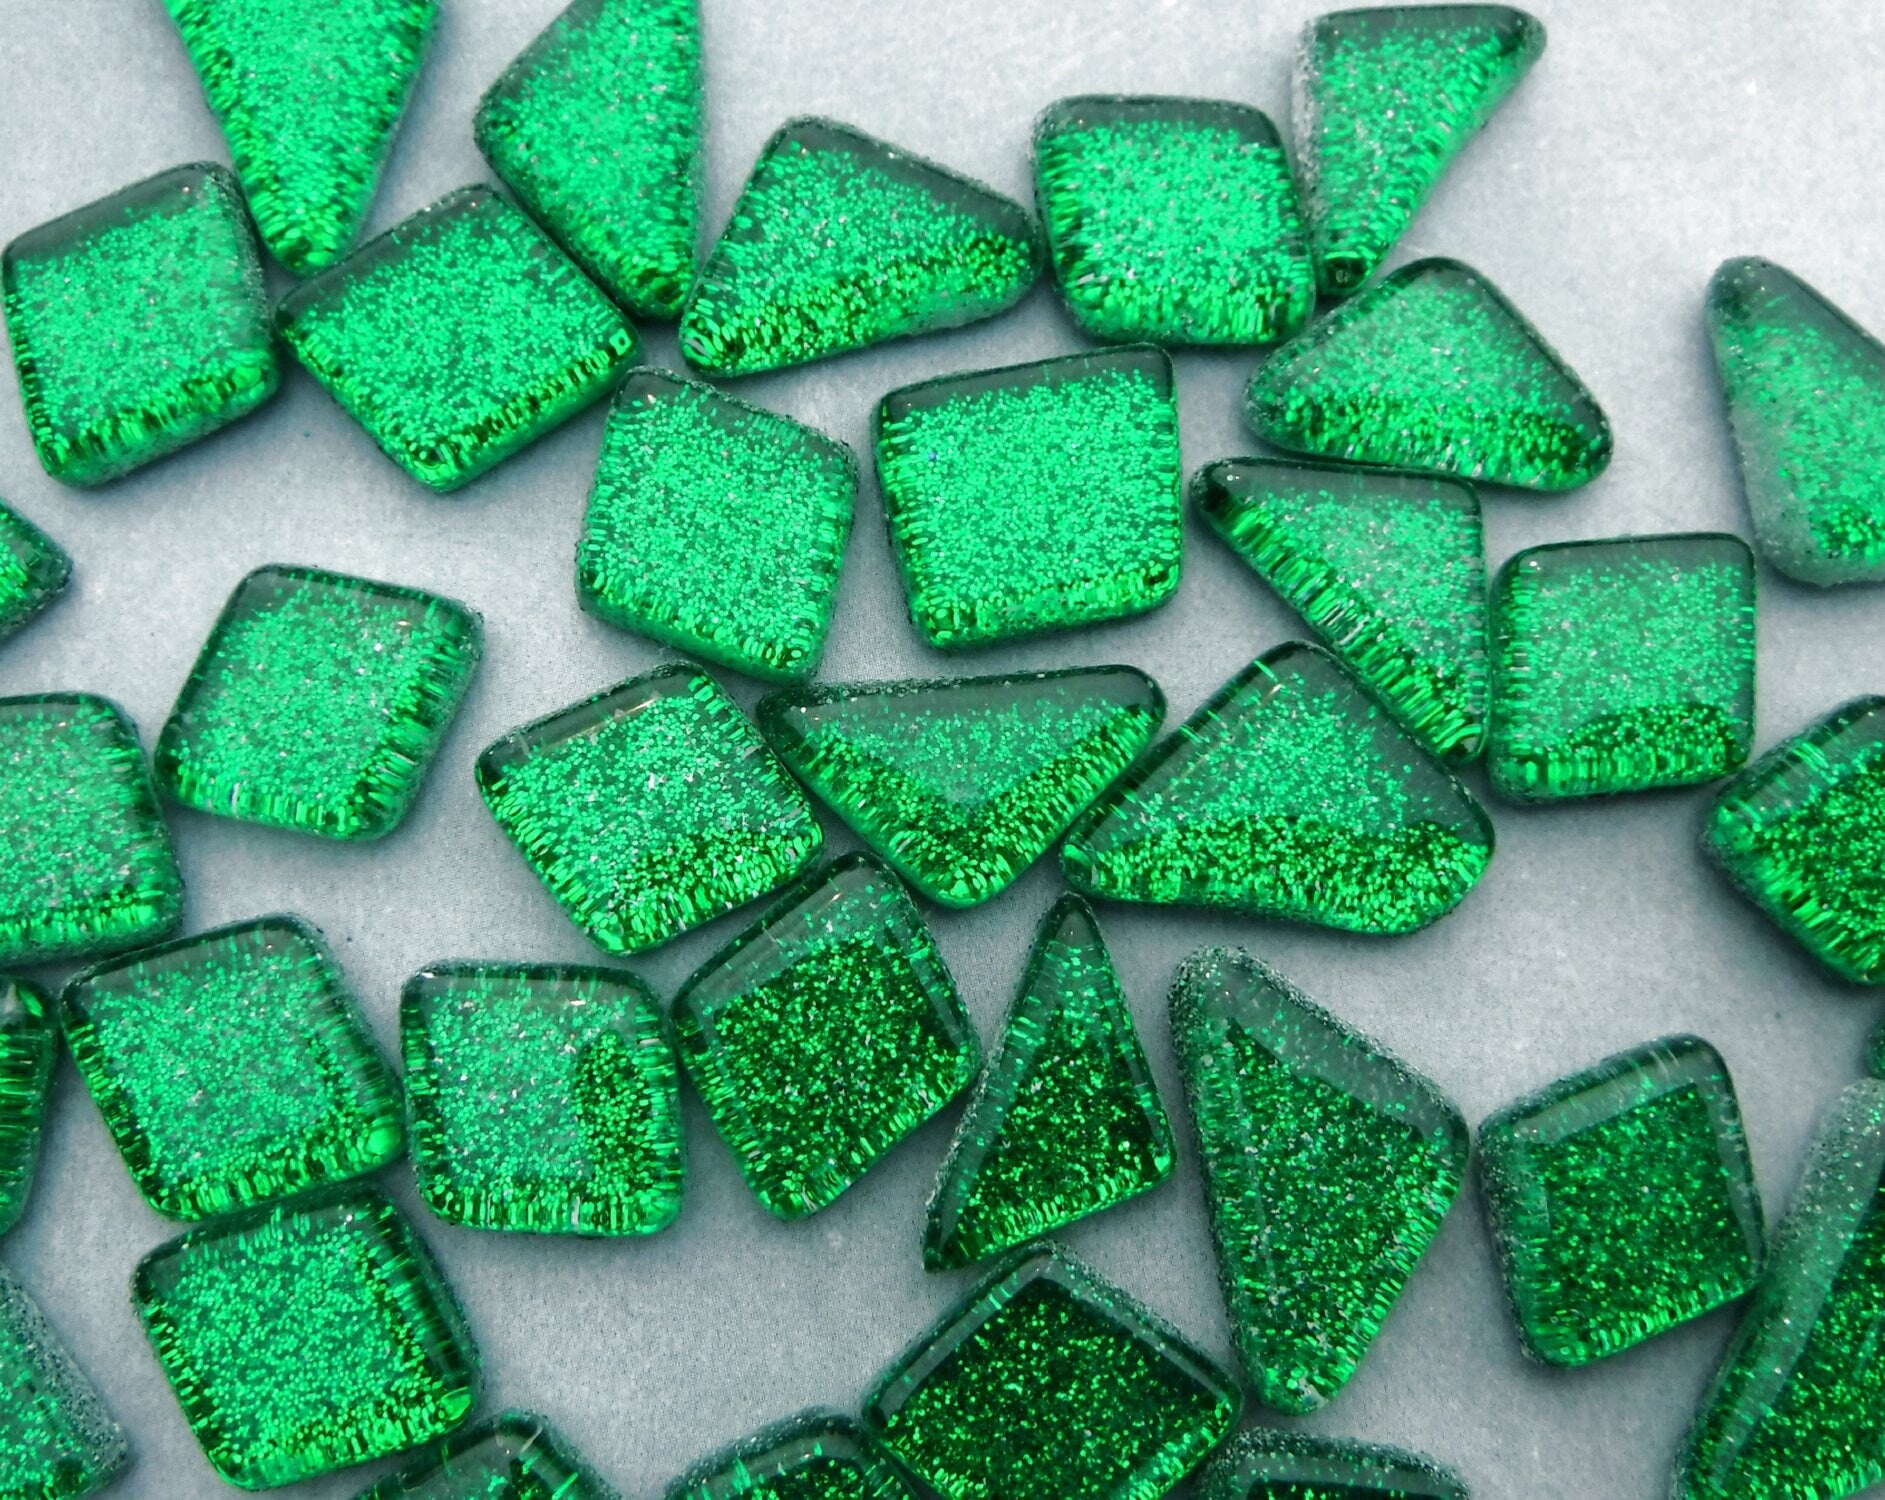 Green Glitter Puzzle Tiles - 100 grams in Assorted Shapes Glass Mosaic Tiles in Deep Forest Green